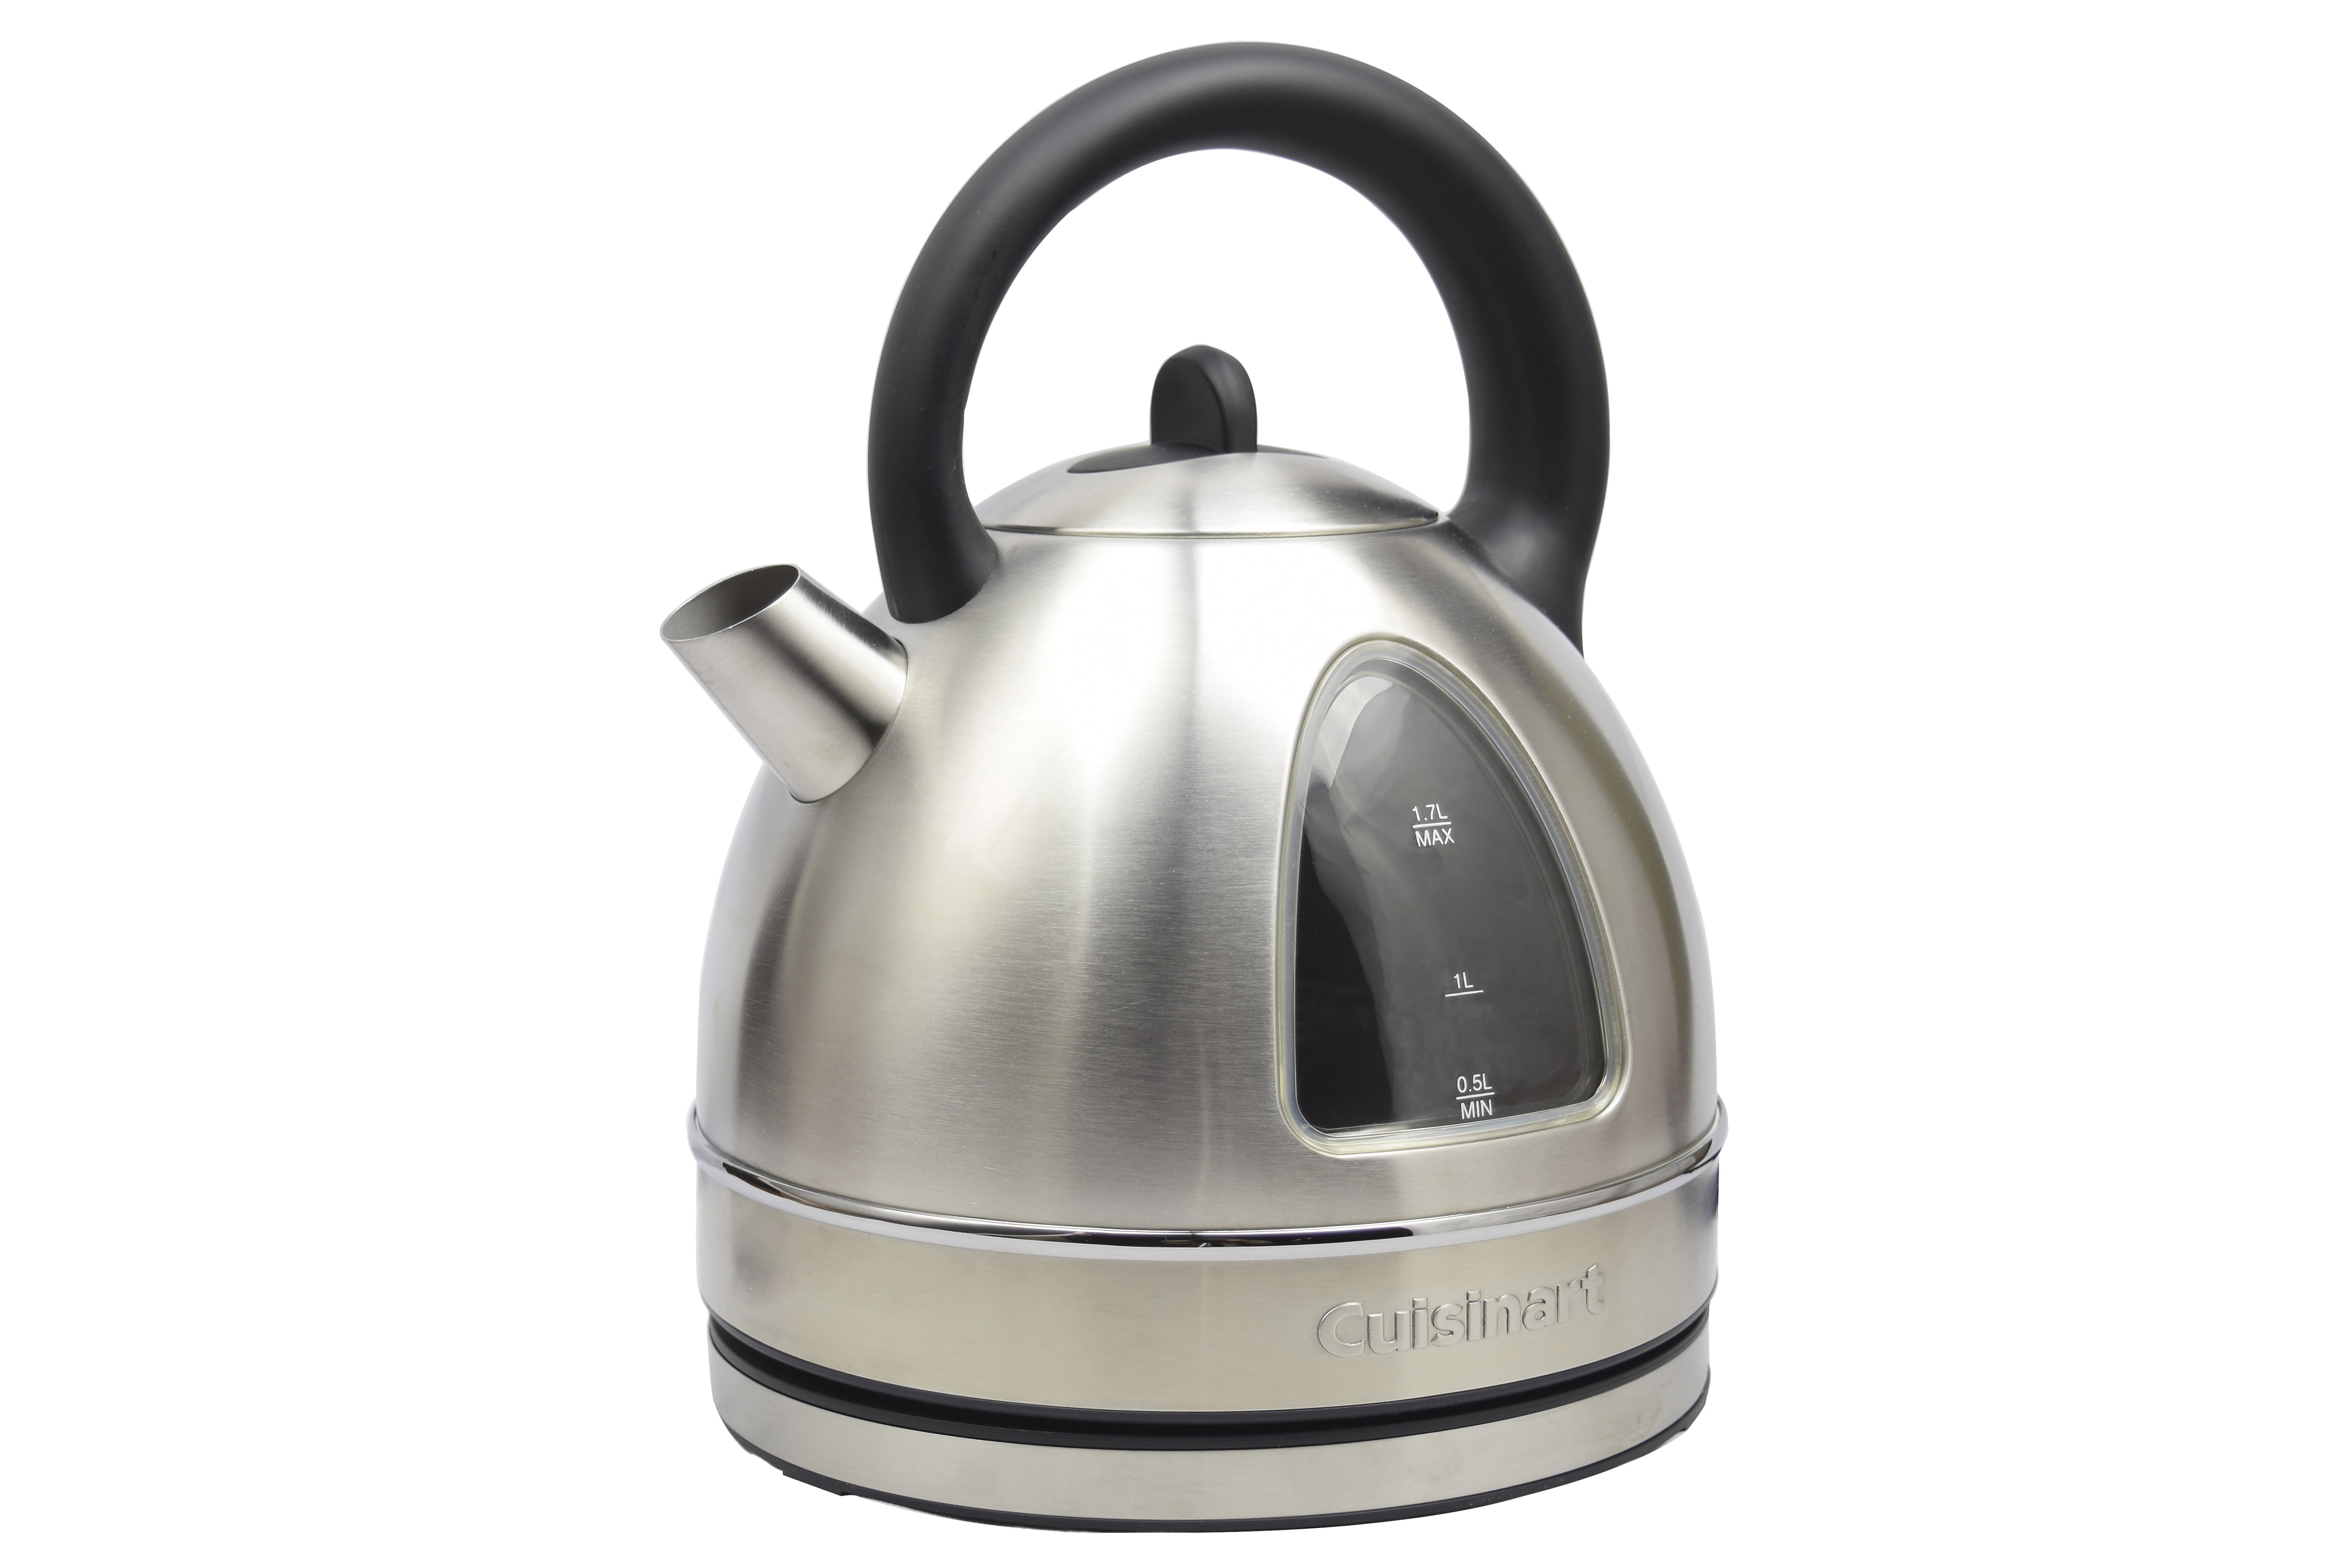 Cuisinart QuicKettle .5-Liter Cordless Electric Water Kettle